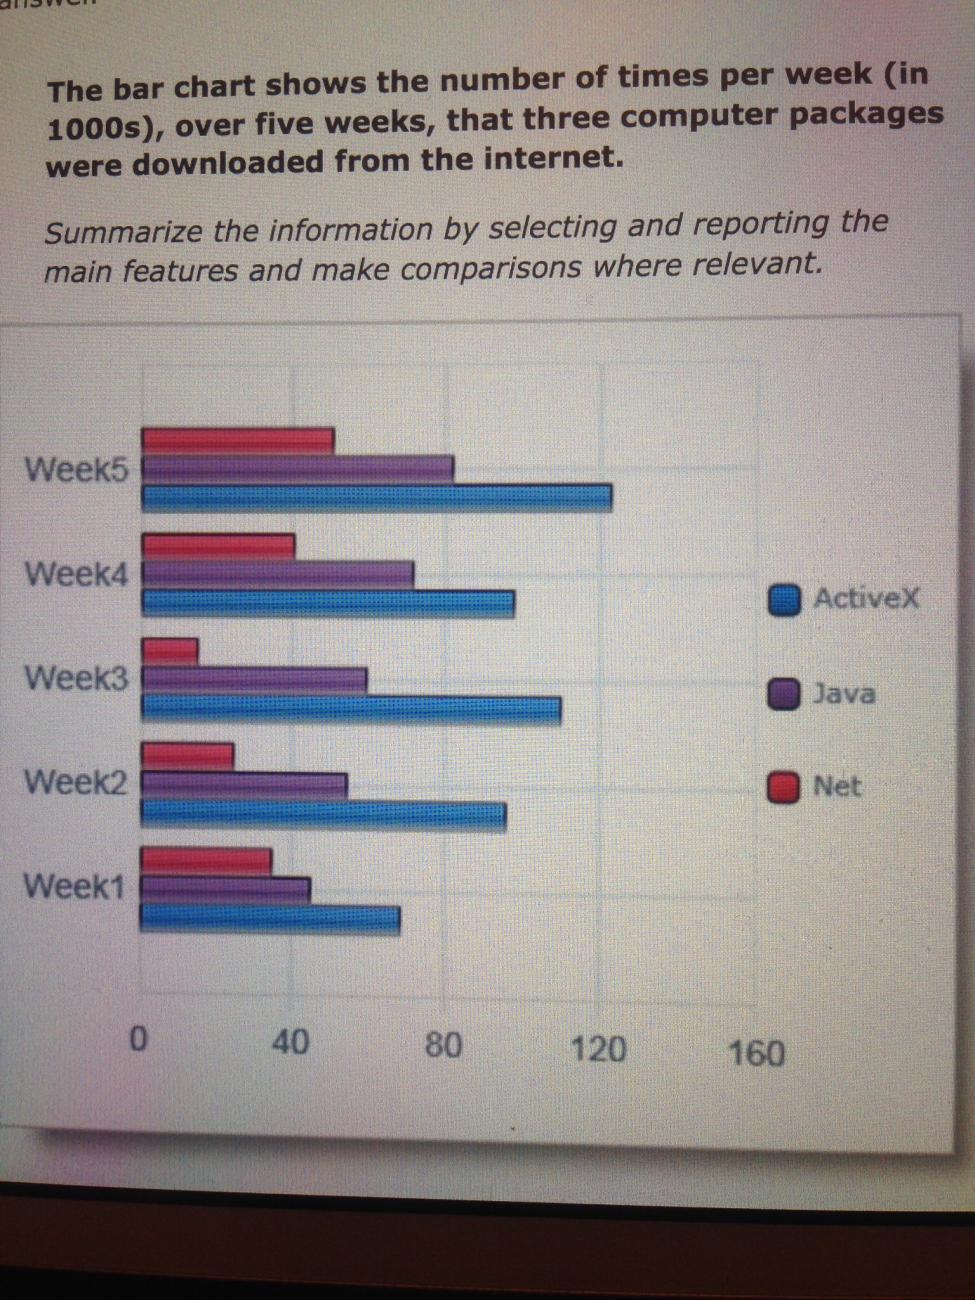 The bar chart shows the number of times per week in 1000s over five